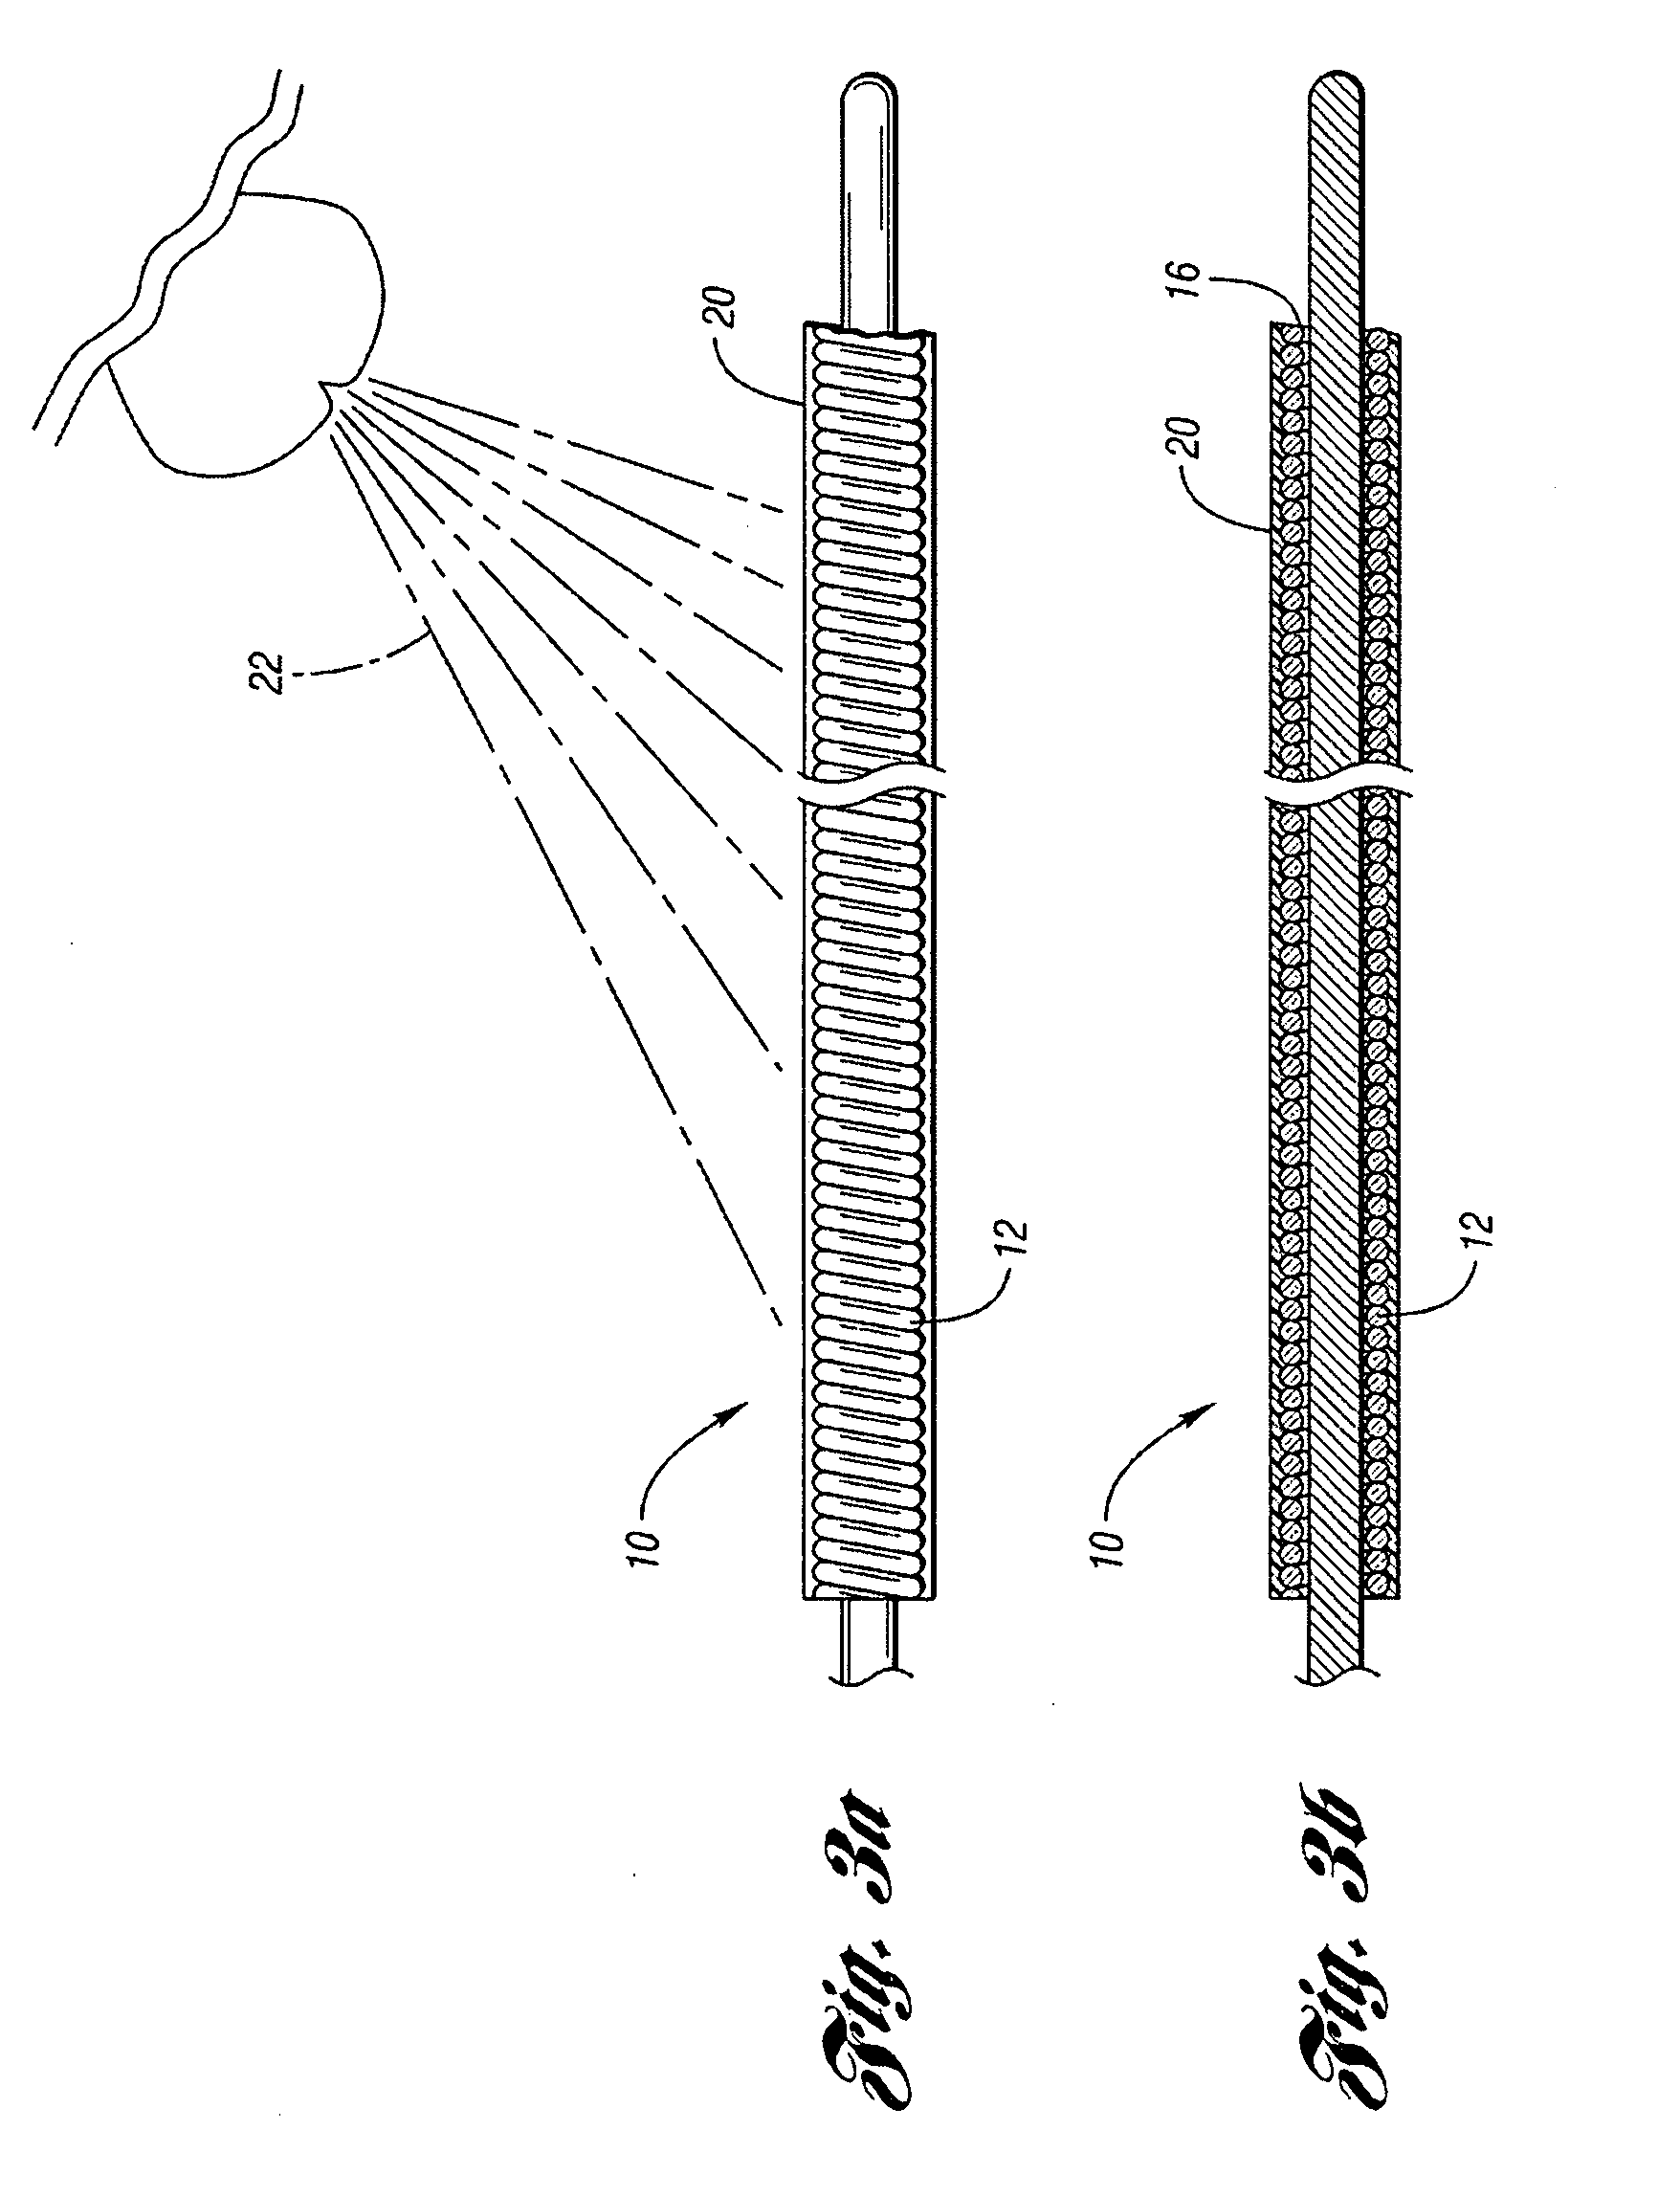 Occluding device for occlusion of a body vessel and method for making the same